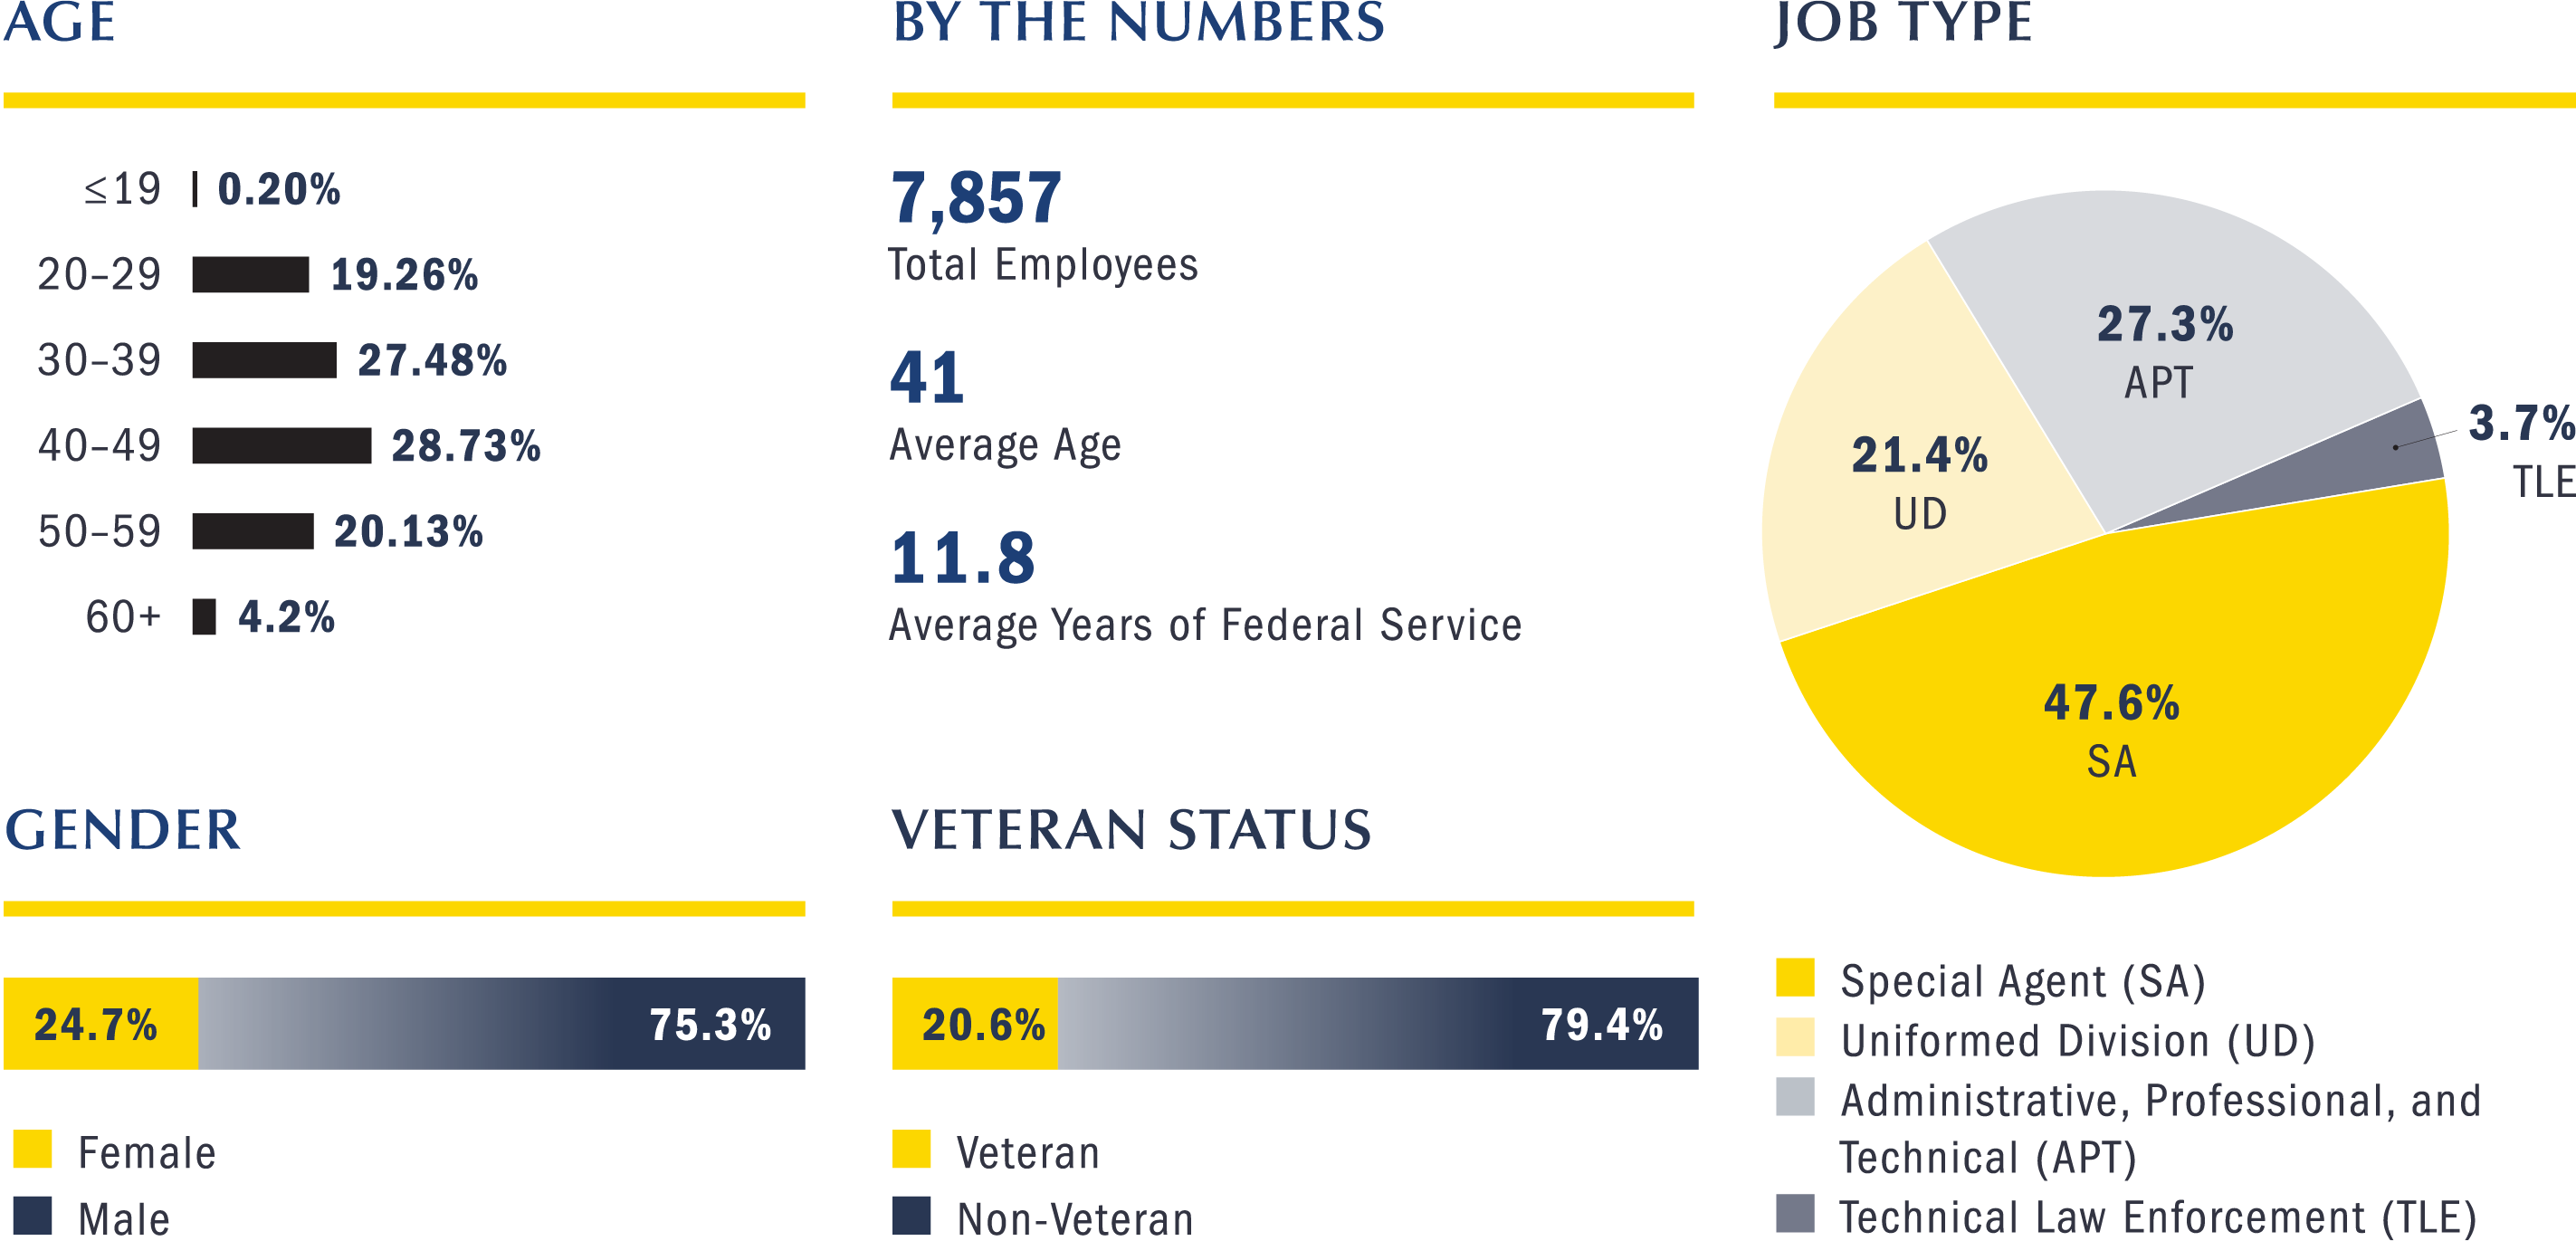 Infographic displaying the following data about Secret Service employees. Age of employees: less than 19: 0.20%; 20-29: 19.26%; 30-39: 27.48%; 40-49: 28.73%; 50-59: 21.13%; 60 and older: 4.20%. By the Numbers: 7,857 total employees, average age of 41, average years of federal service is 11.8 years. Job type percentages: Special Agents are 47.6%, Uniformed Division officers are 21.4%, Administrative, Professional, and Technical staff are 27.3%, Technical Law Enforcement Officers are 3.7%. The gender percentages of employees are 24.7% female and 75.3% male. The veteran status percentages are 20.6% veteran and 79.4% non-veteran.